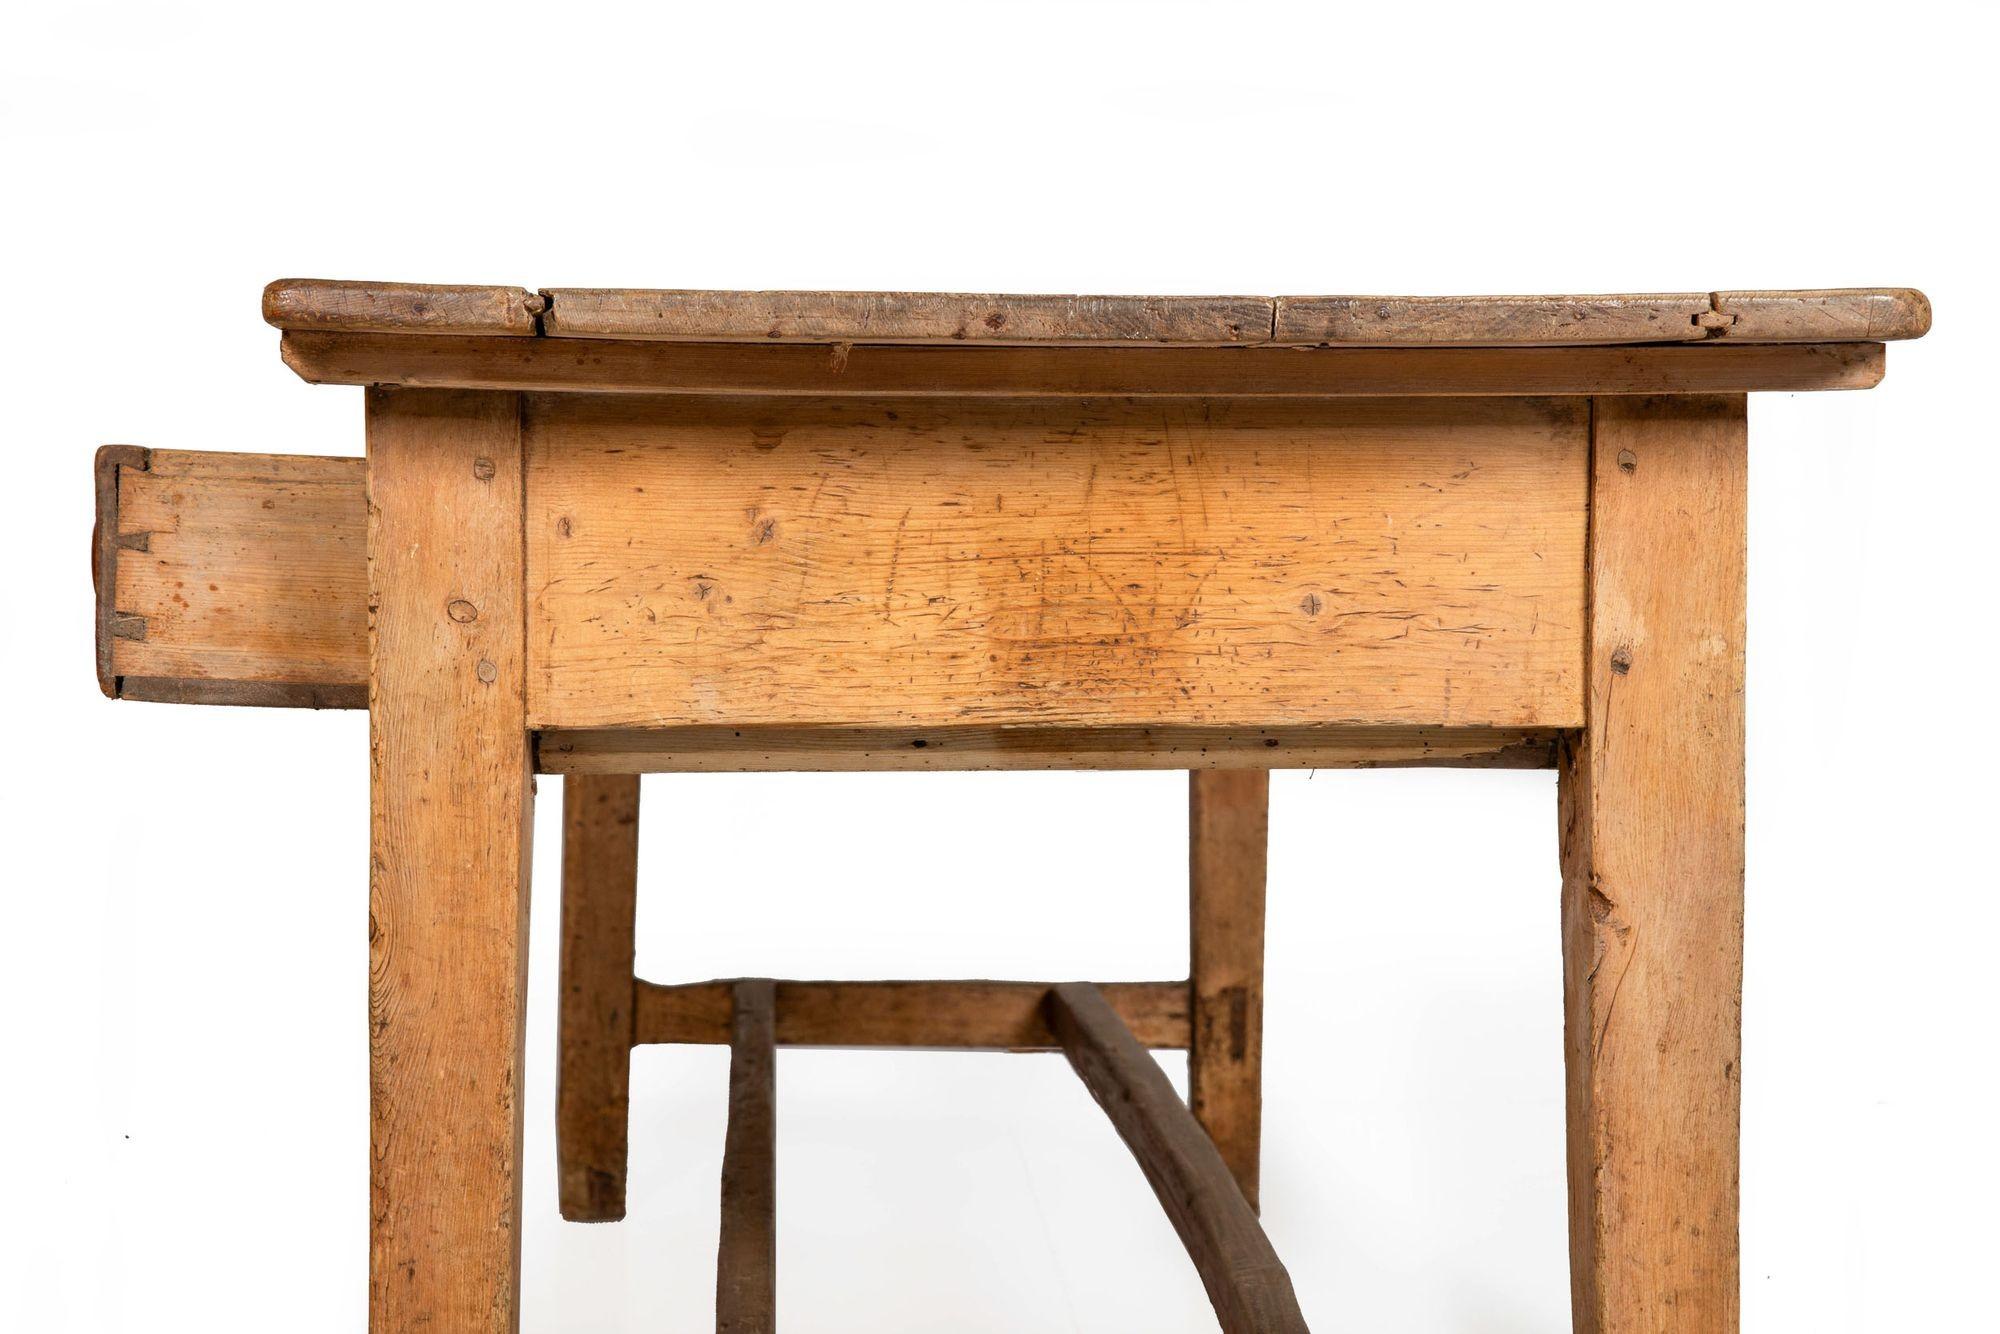 Worn and Patinated English Antique Pine Tavern Table Desk For Sale 6